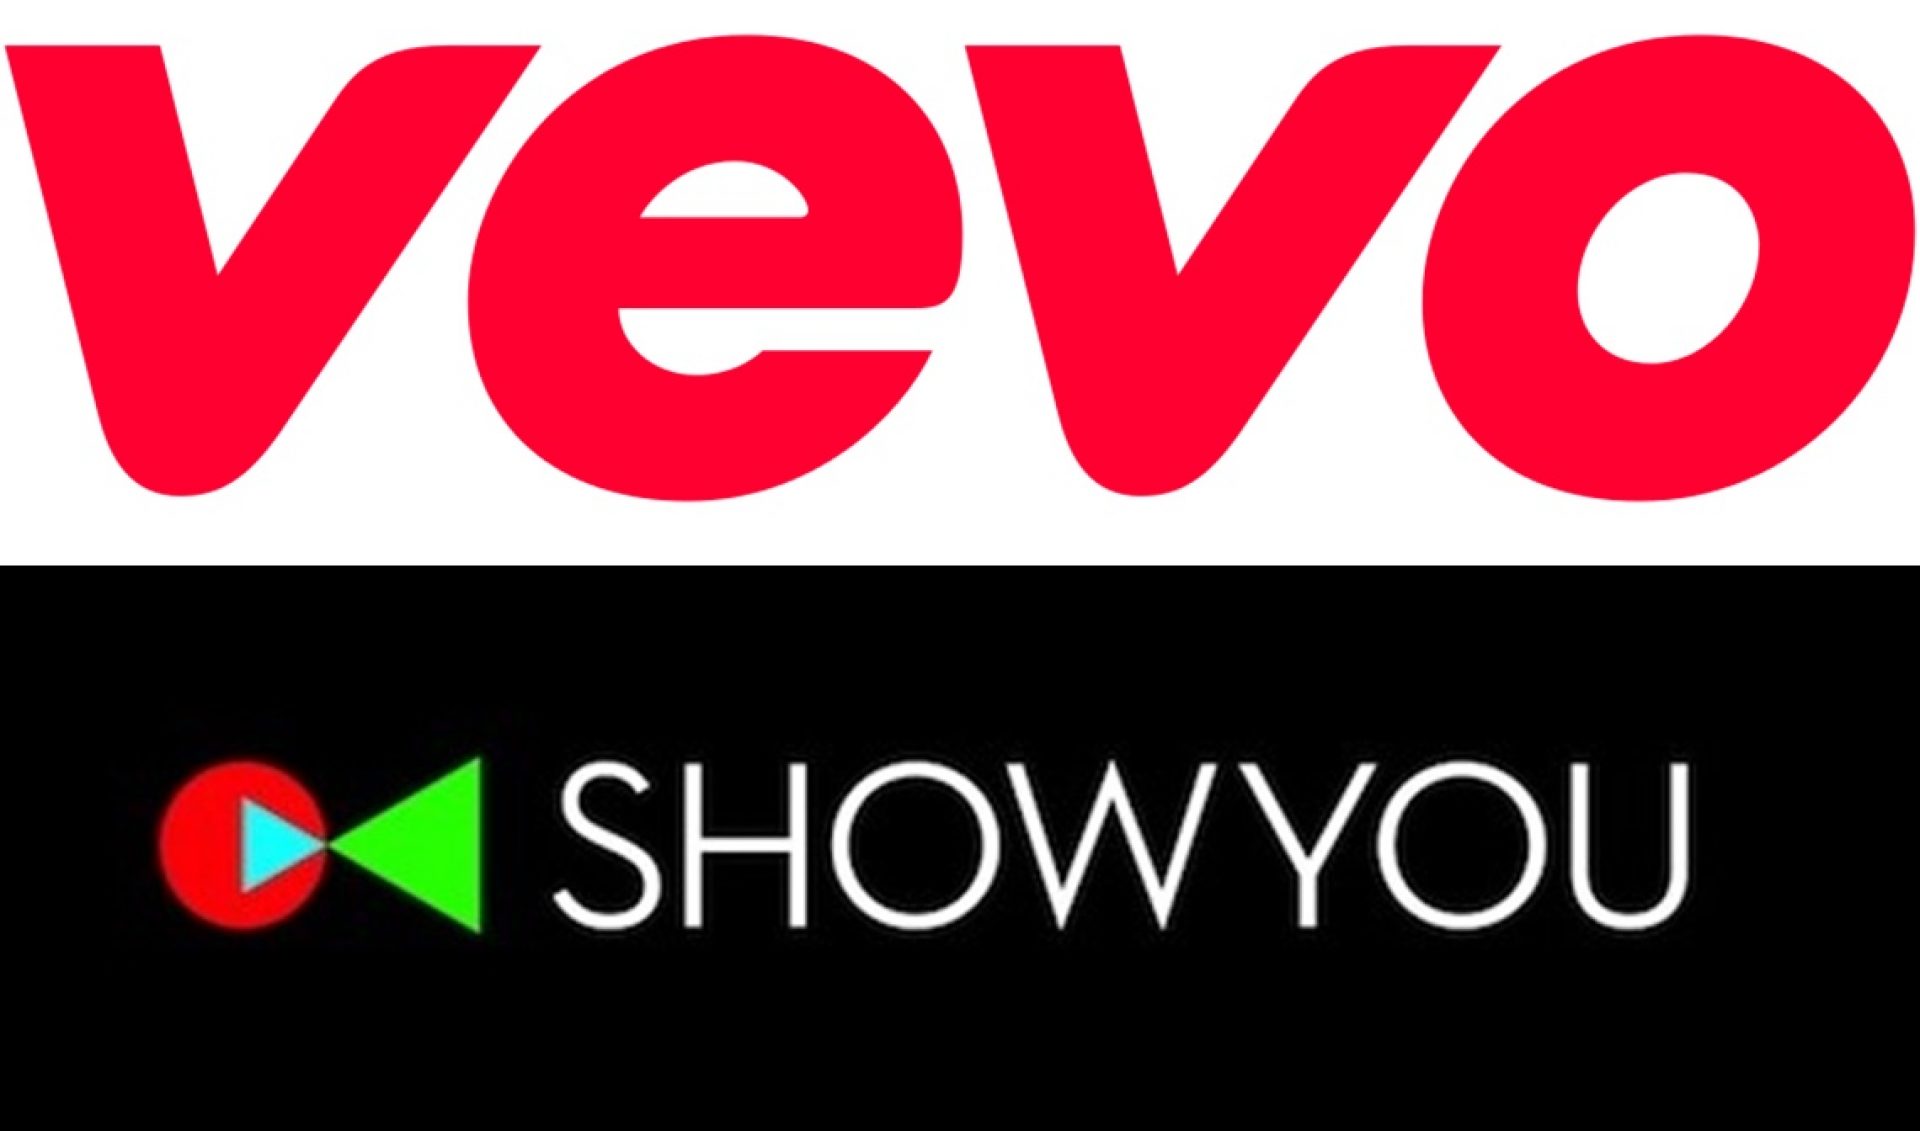 VEVO Acquires Social Media Aggregator-Turned-Subscription Service ShowYou